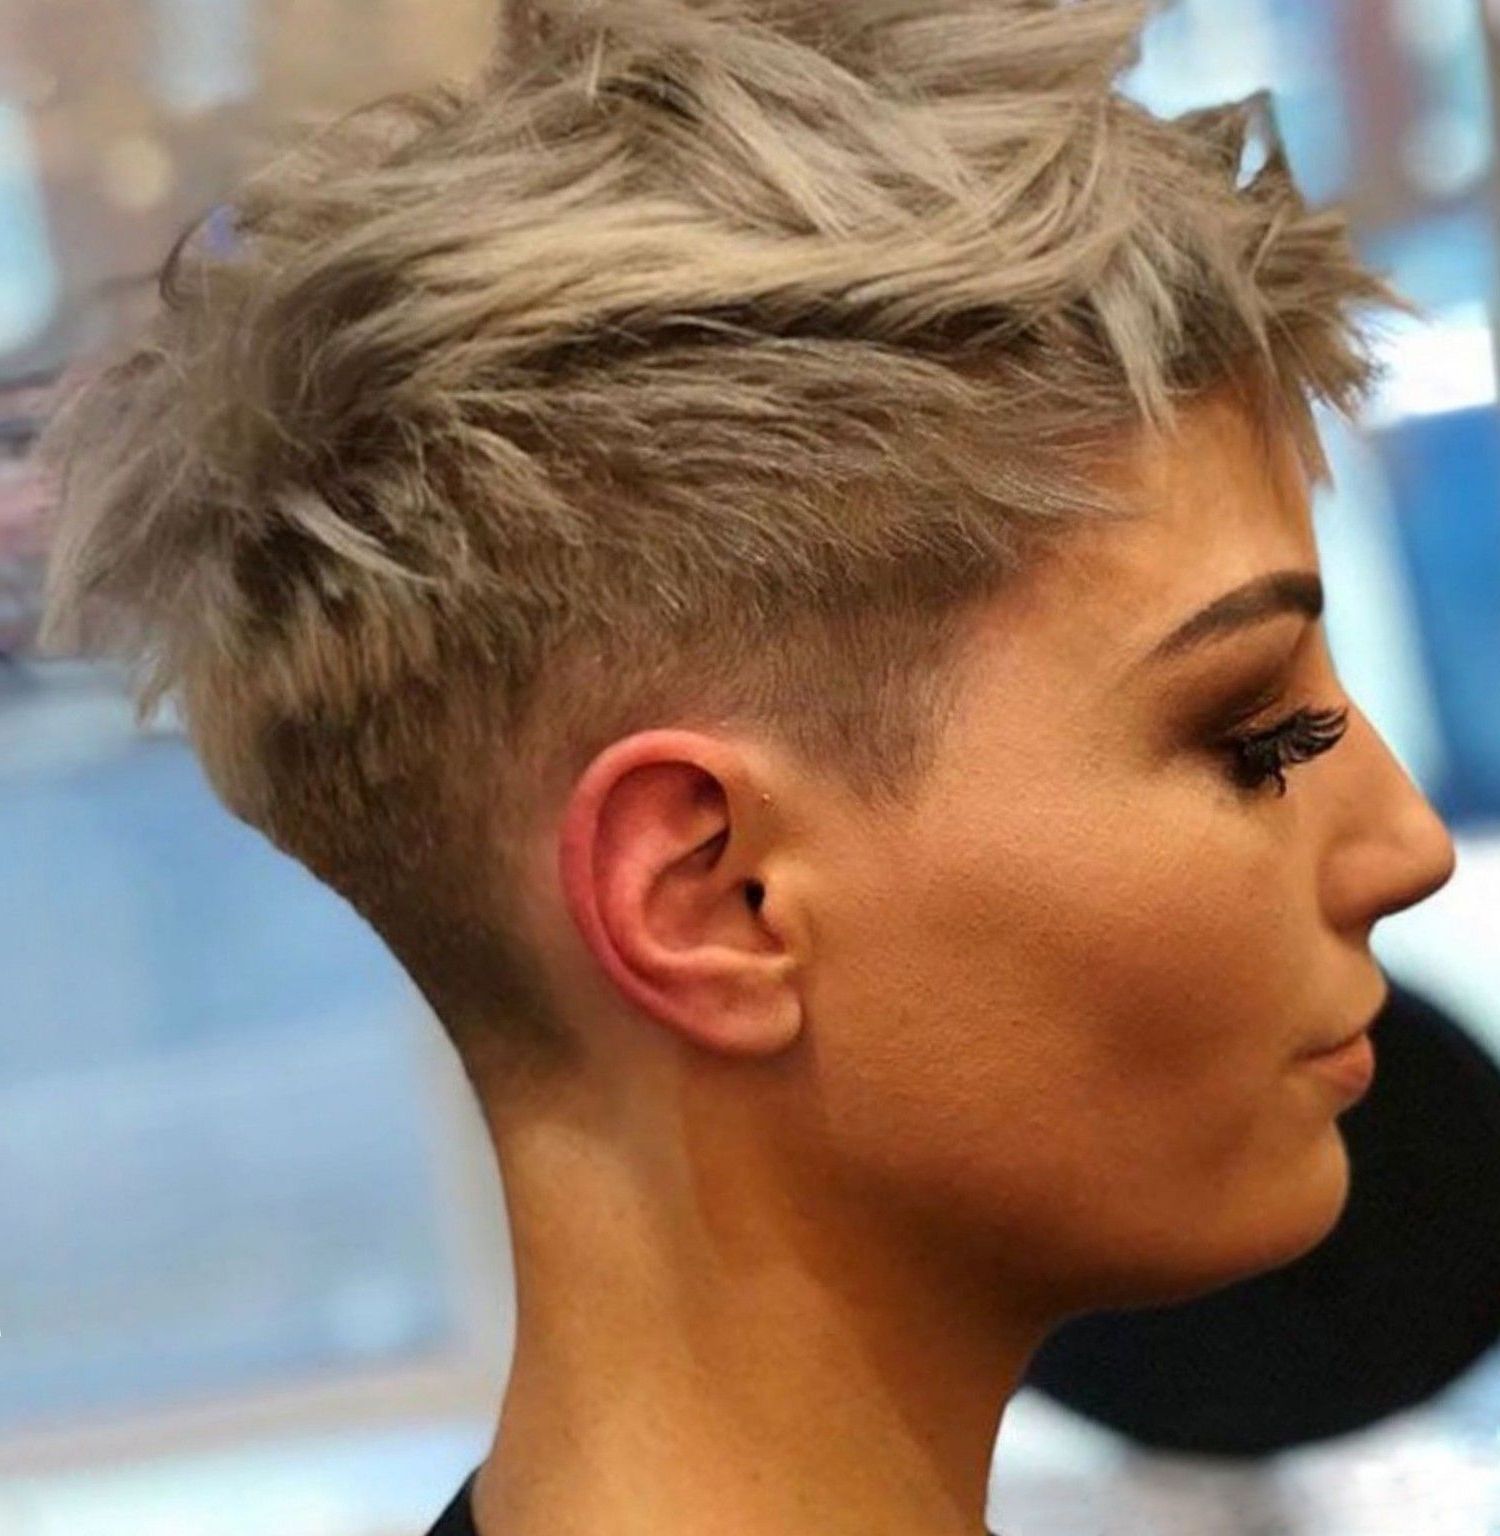 48 Short Pixie Hairstyle Ideas For Young Ladies And Mature Women | Haircut  For Thick Hair, Pixie Haircut For Thick Hair, Short Hair Undercut Within Extra Short Women’s Hairstyles Idea (View 10 of 25)